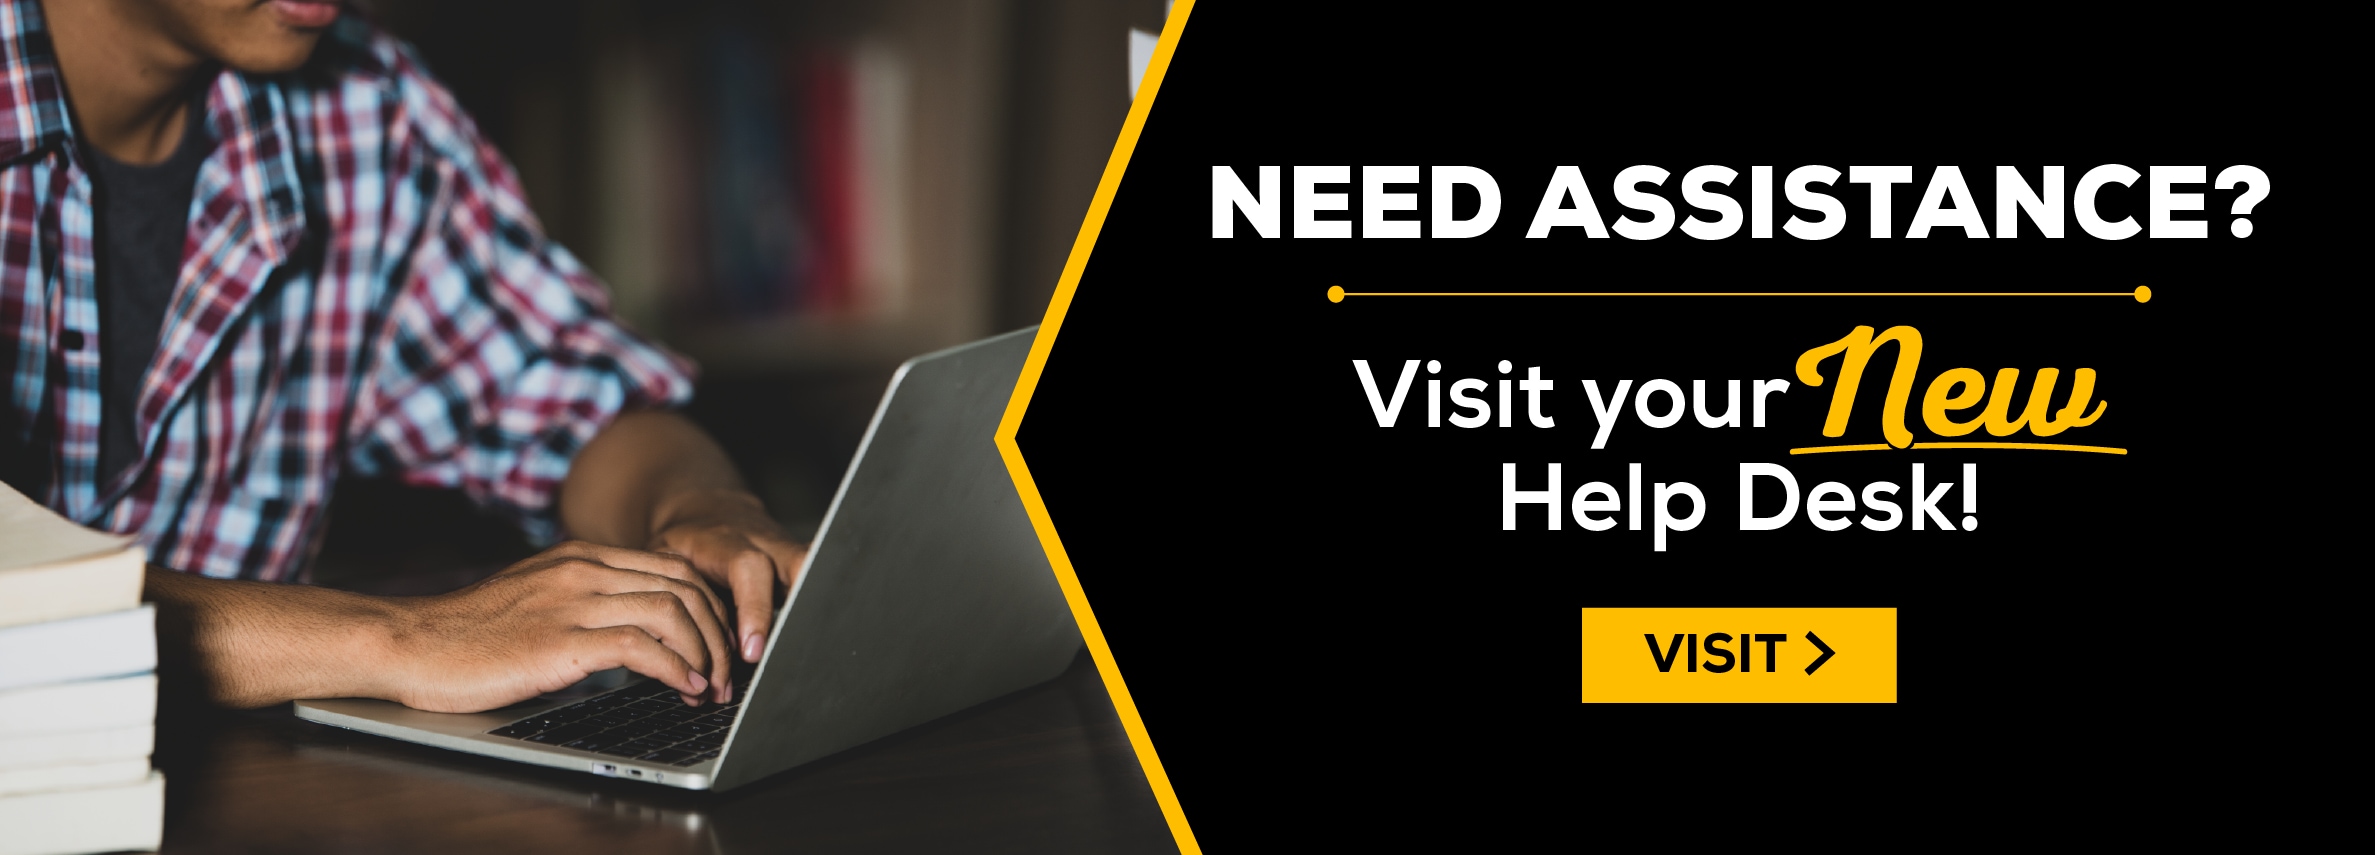 NEED ASSISTANCE? Visit your New Help Desk! VISIT > (new tab)